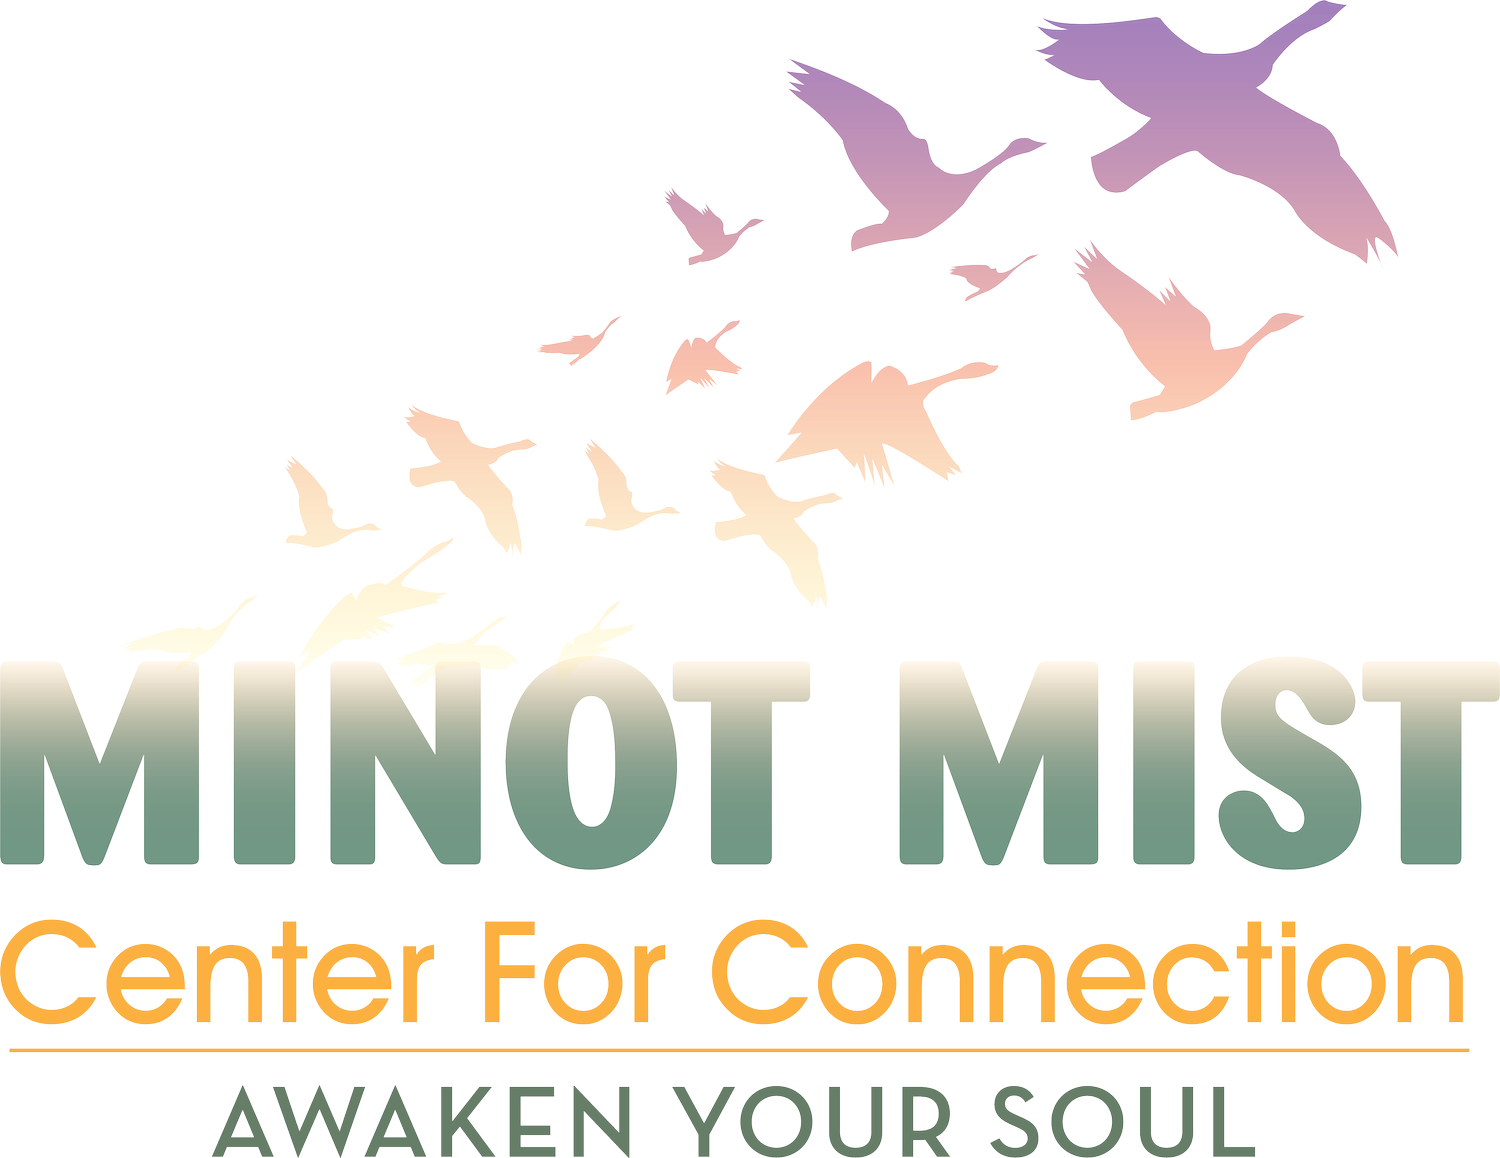 Minot Mist Center for Connection